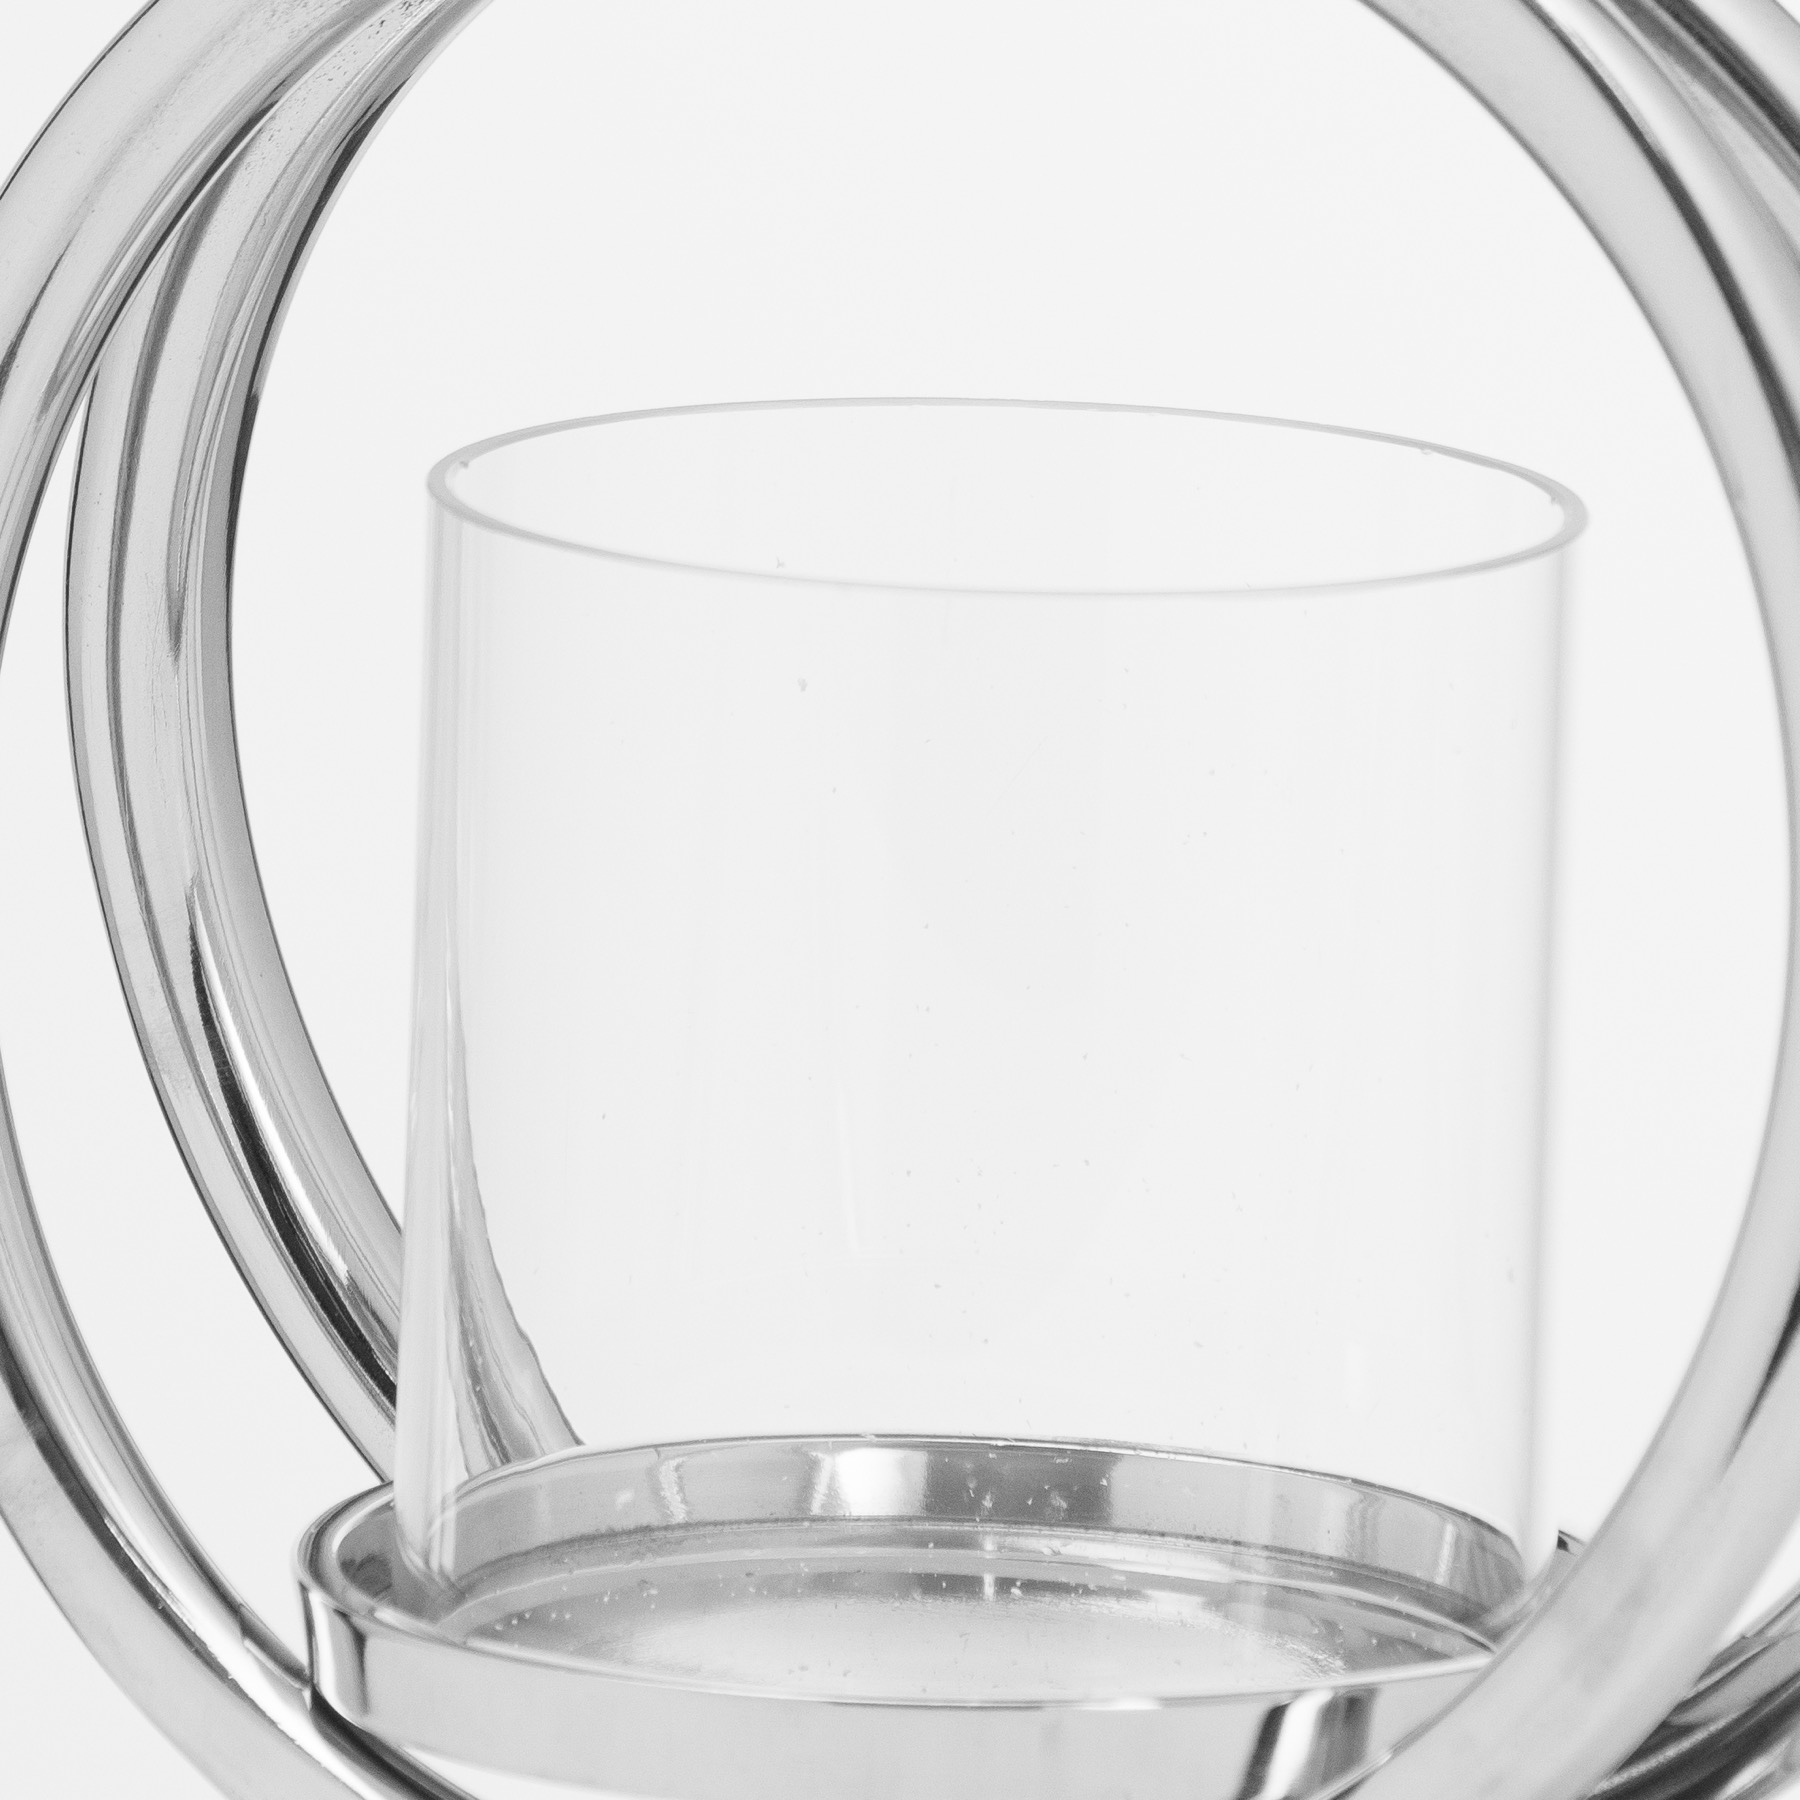 Ohlson Silver Twin loop Candle Holder - Image 2